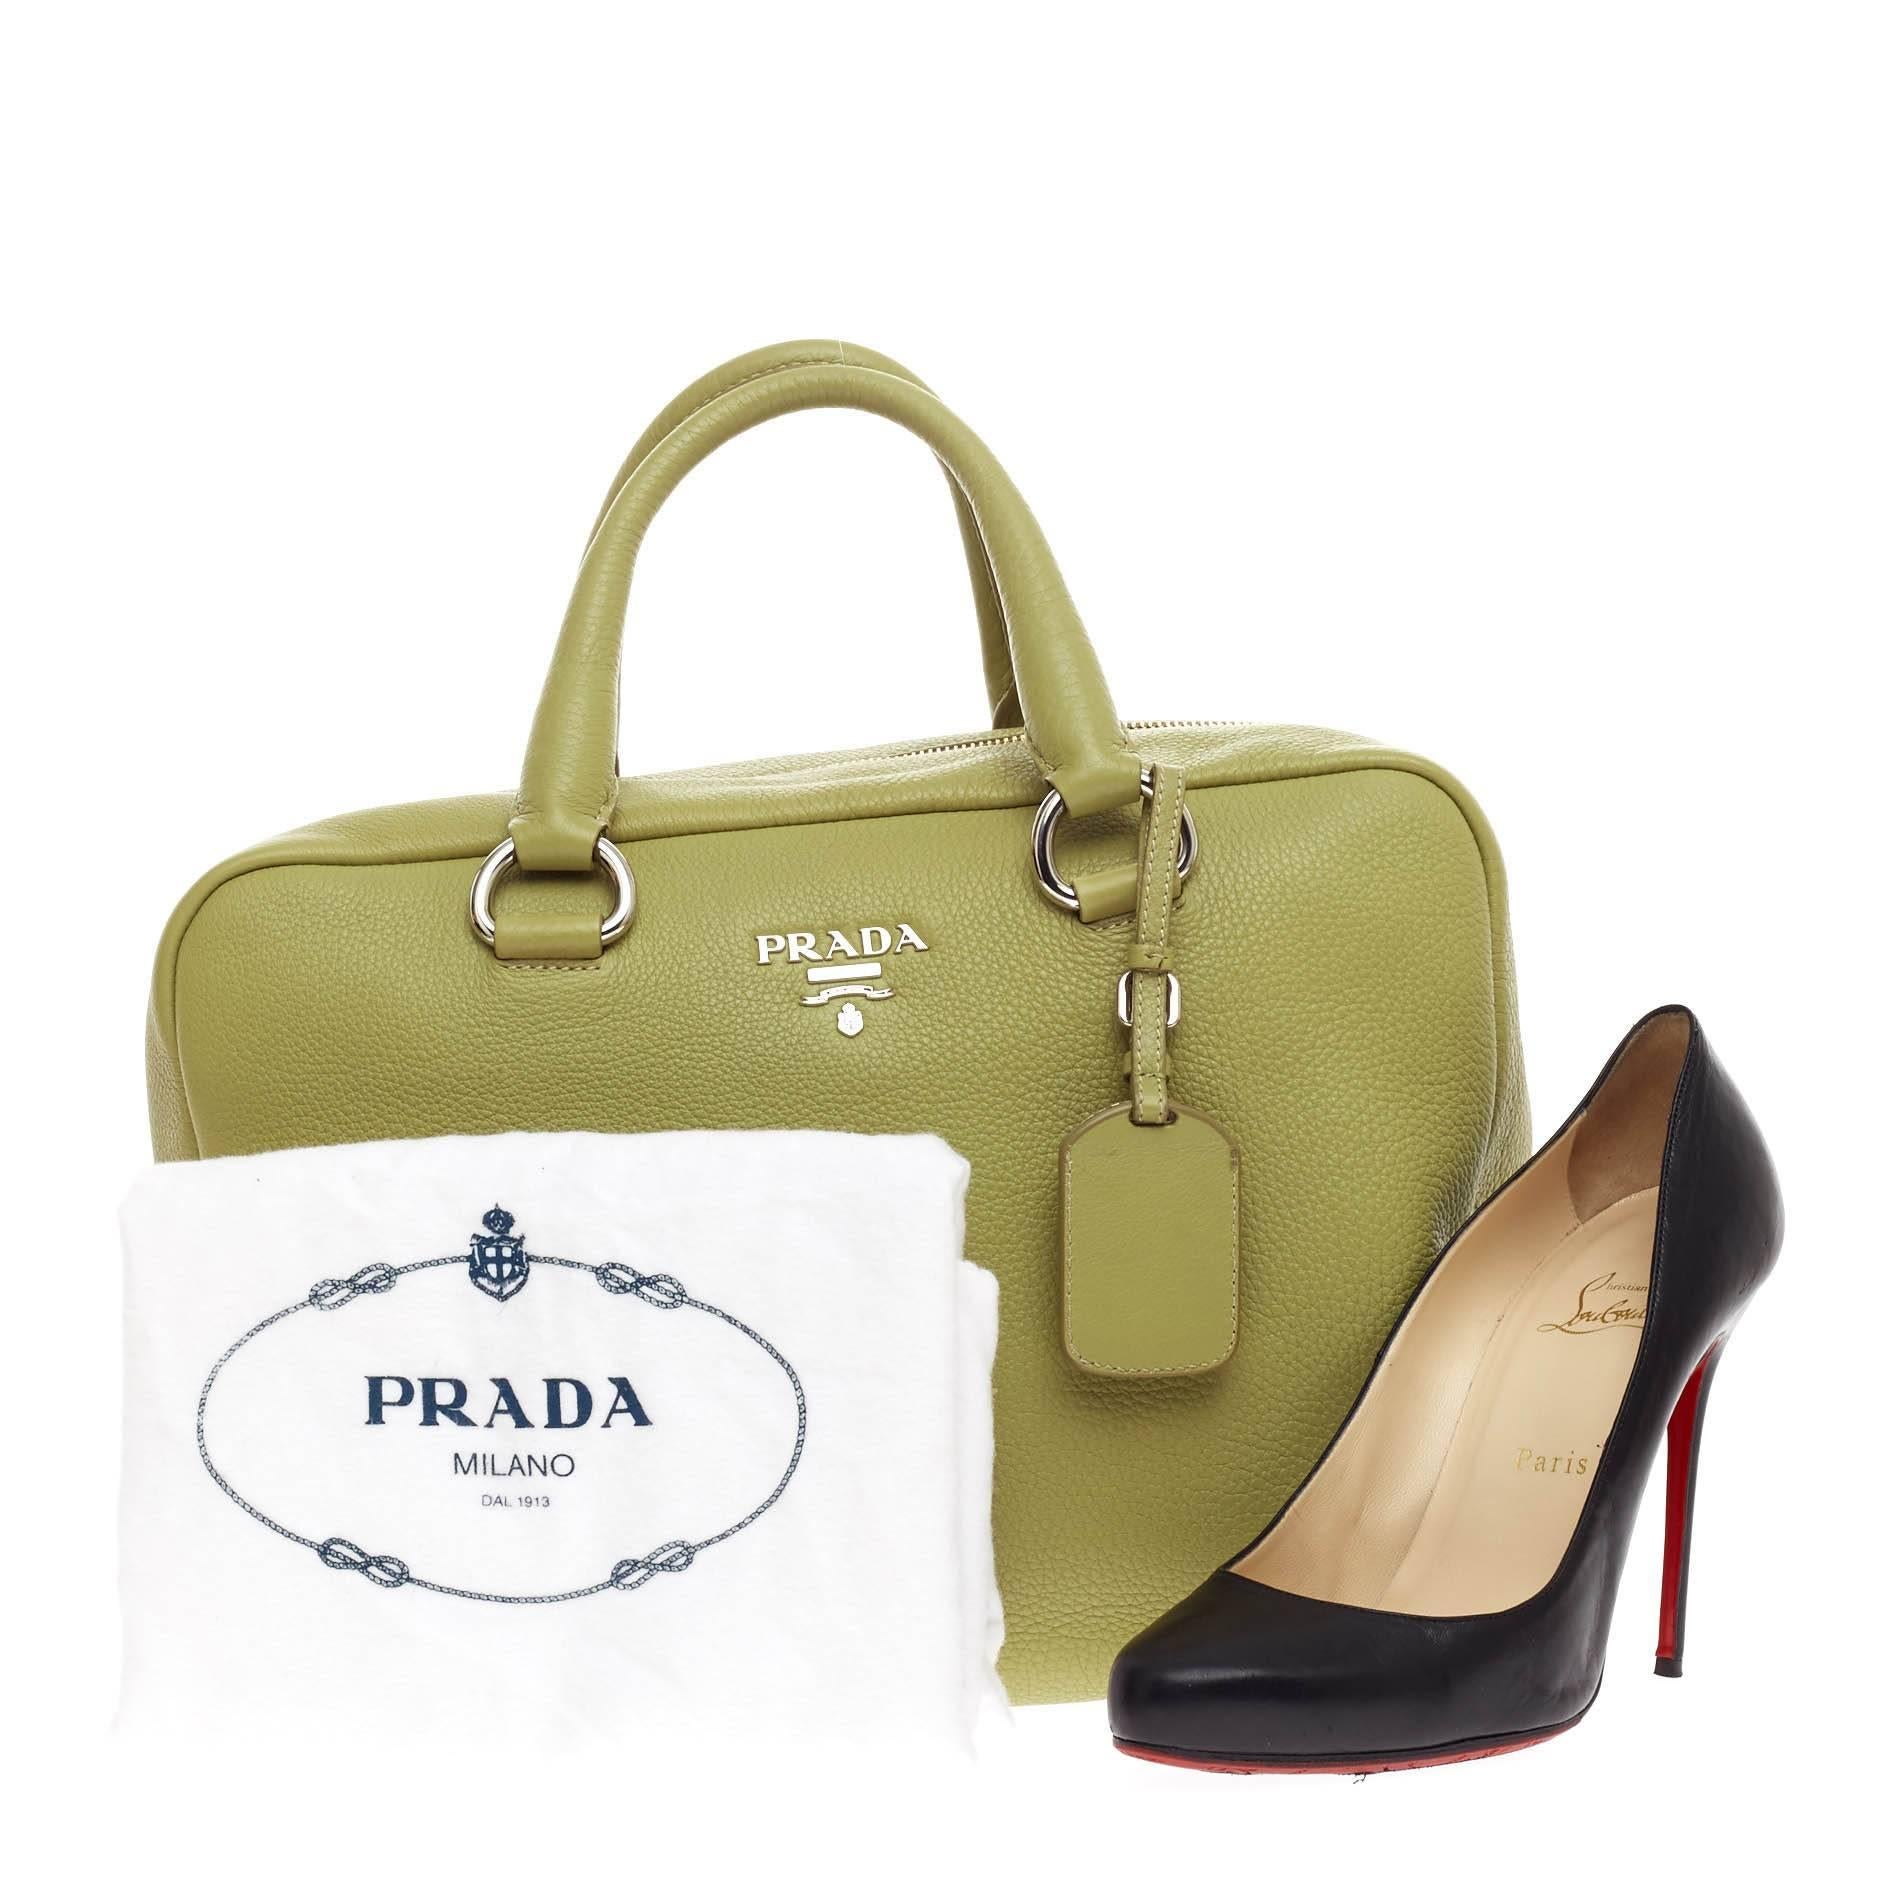 This authentic Prada Bauletto Vitello Daino Medium is your perfect everyday bag. Crafted in lime green vitello daino leather, this fresh, modern bag features dual-rolled leather handles, Prada logo at the center, protective base studs and